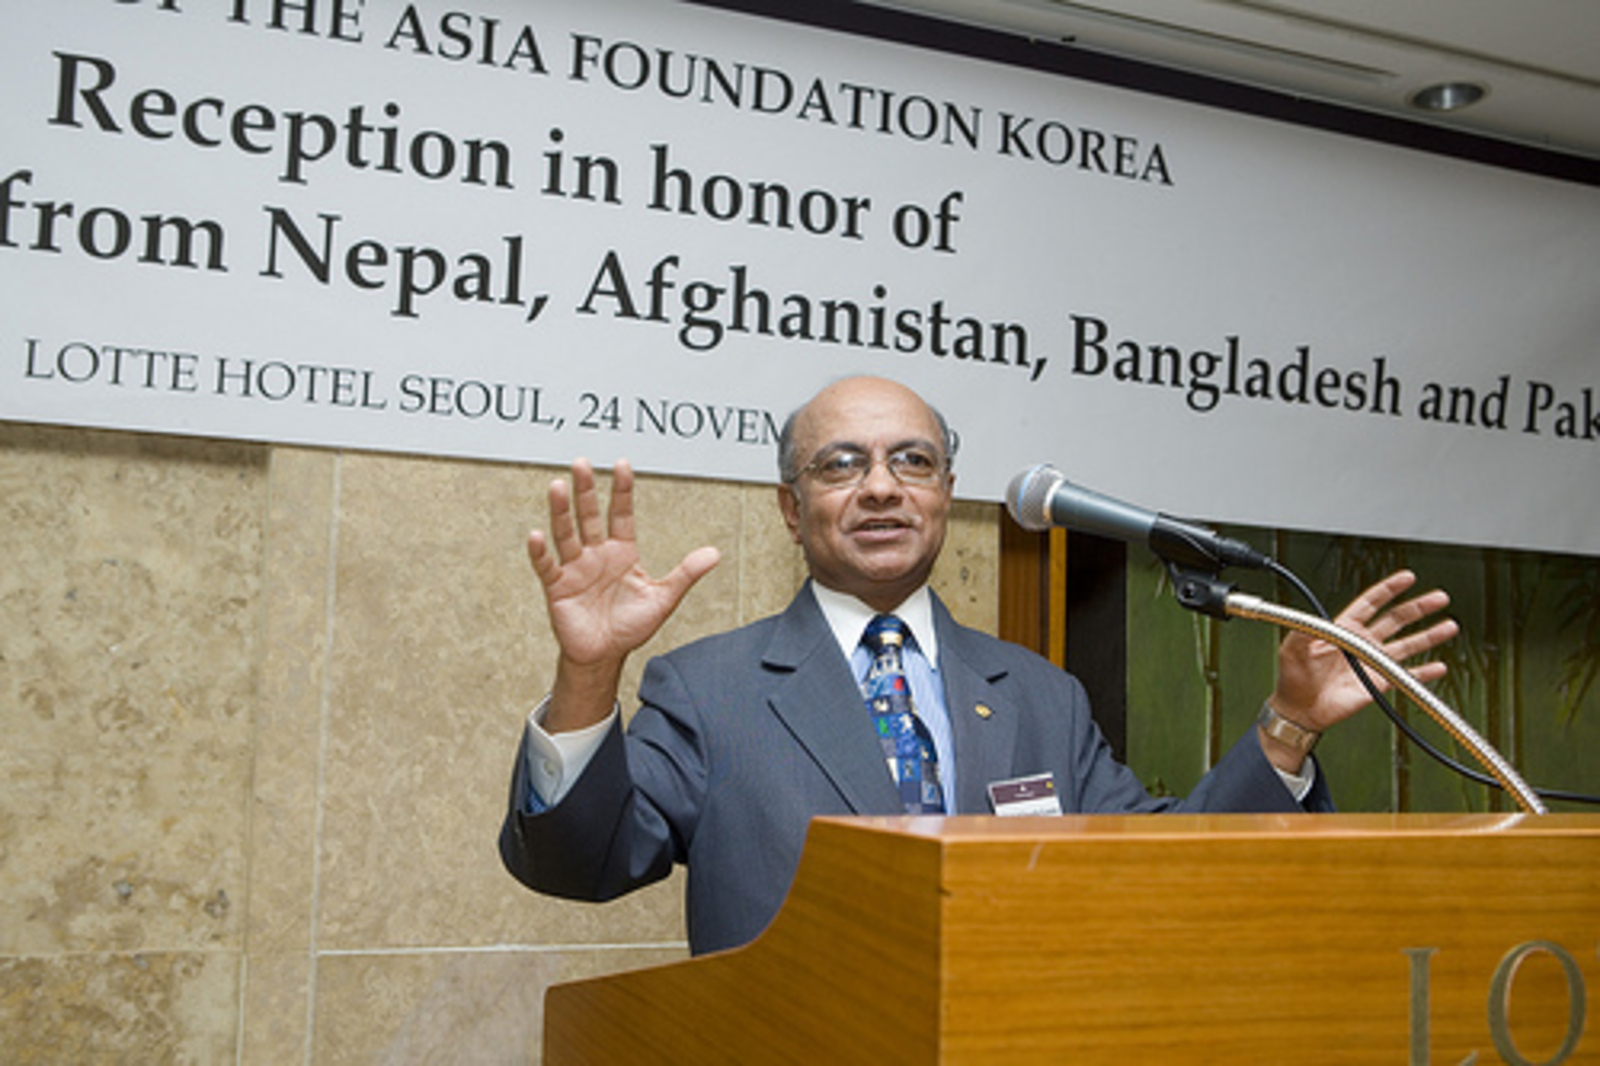 Kul Chandra Gautam, former Assistant Secretary-General of the United Nations and former Deputy Executive Director of UNICEF, delivers a presentation at The Asia Foundation's conference on Korea’s aid strategy.